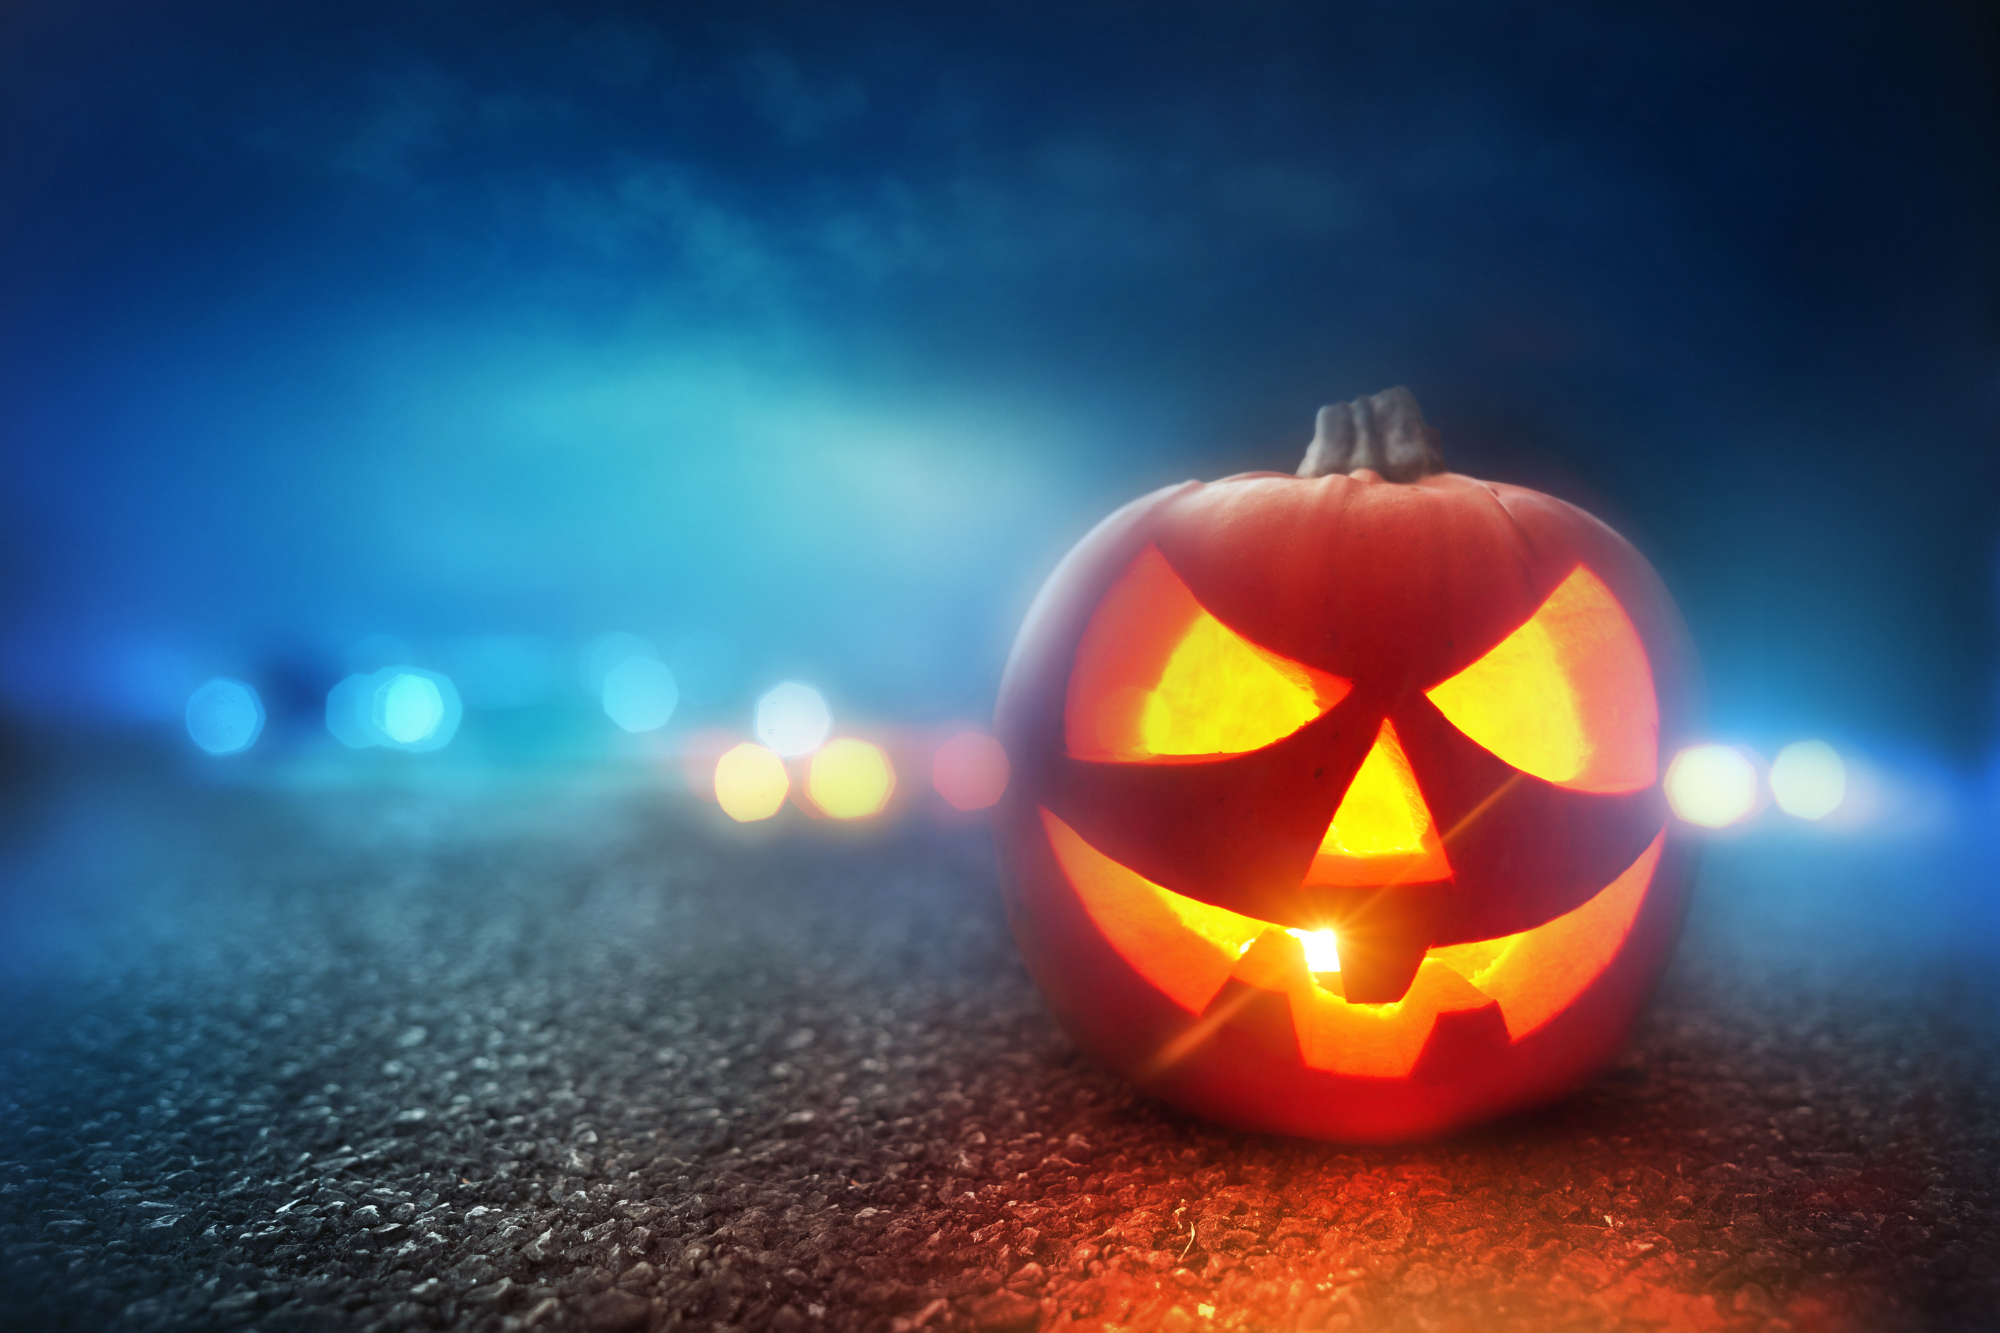 Jack-o-lantern on misty road with blue haze in background, stop scaring yourself.